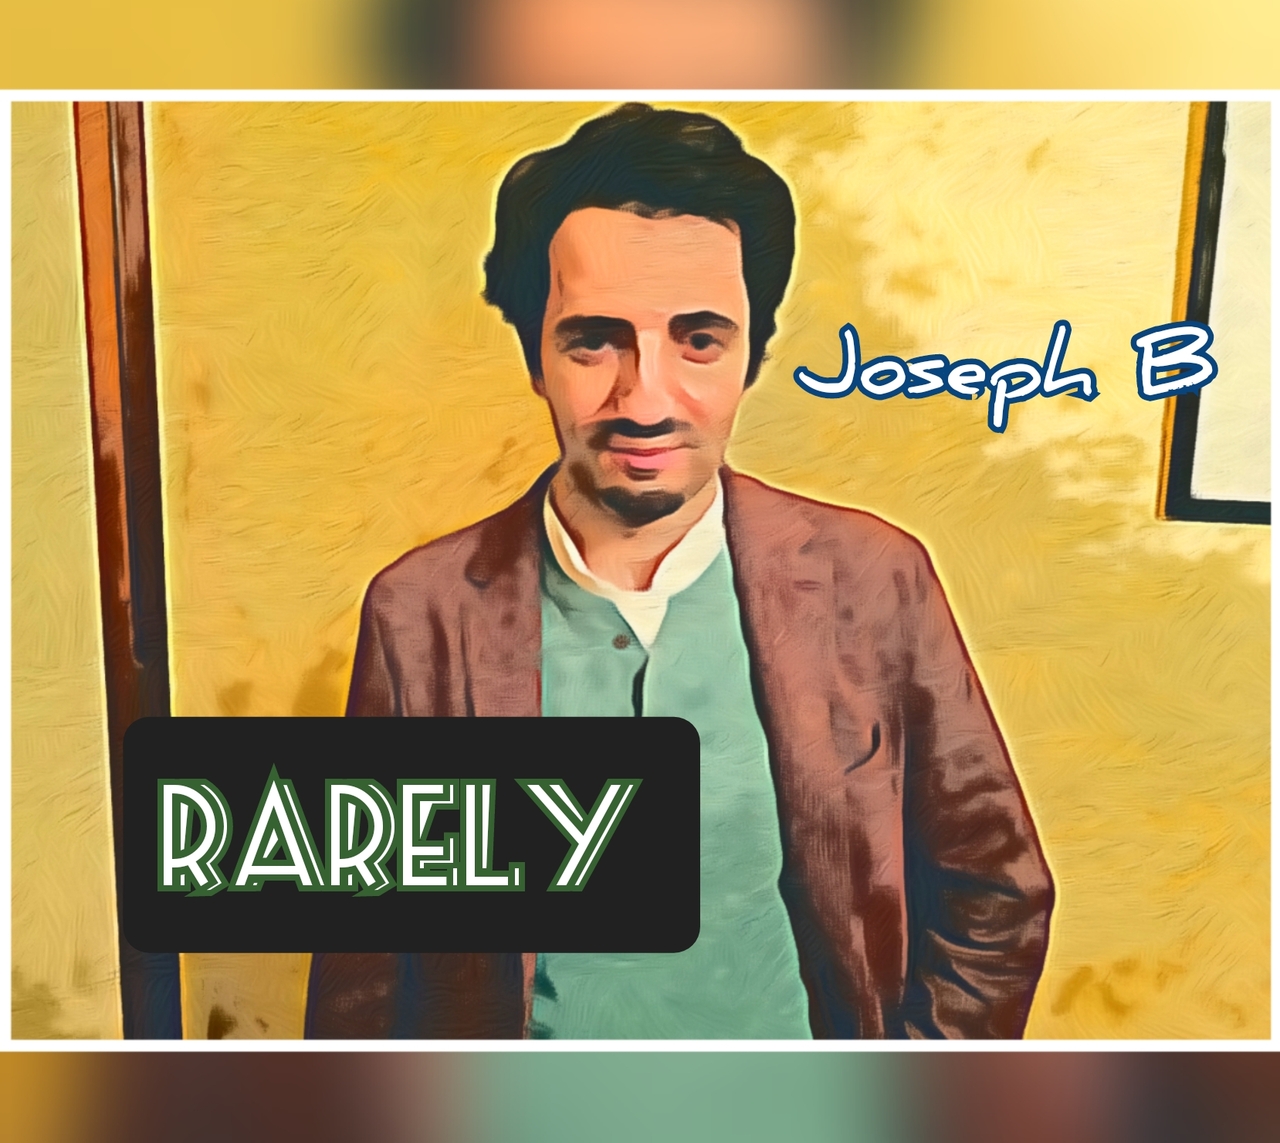 RARELY by Joseph B. (Instant Download)